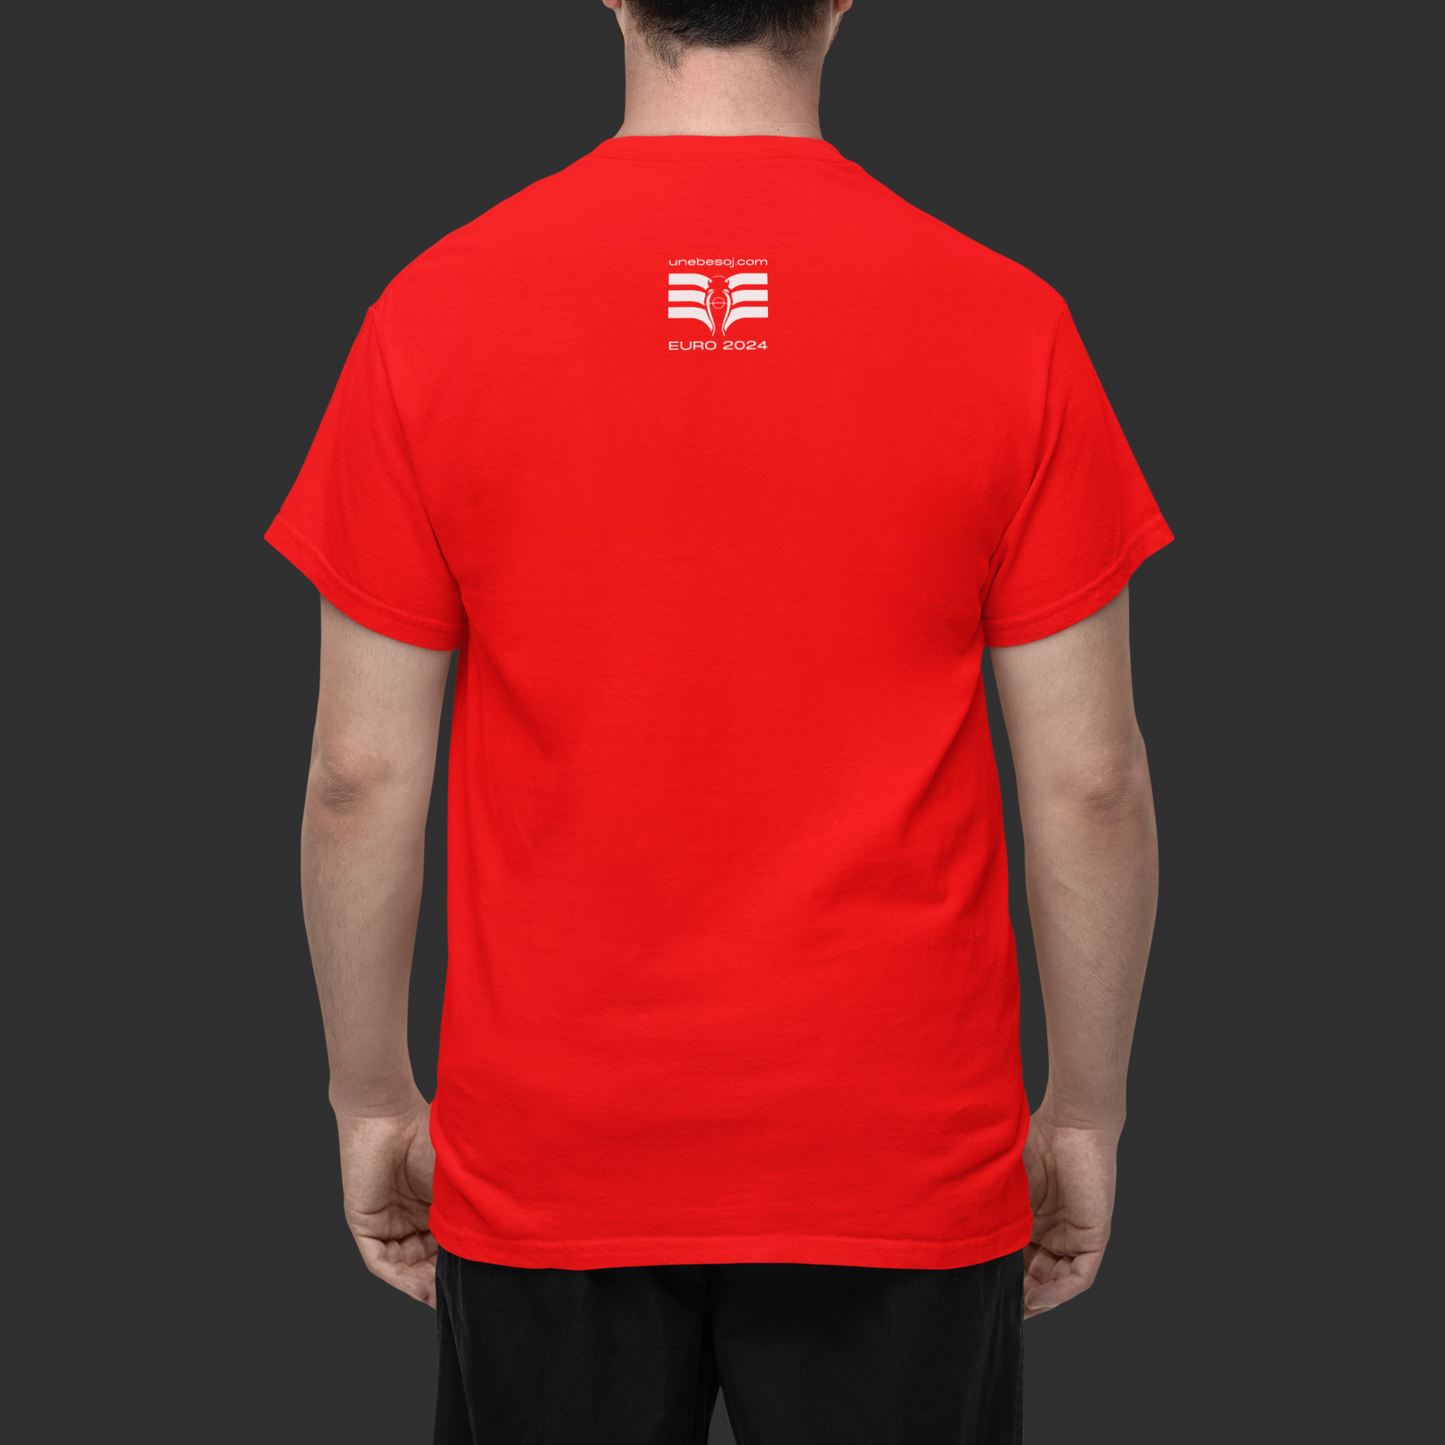 RED T-SHIRT WITH EAGLE - SMALL EAGLE ON THE BACK